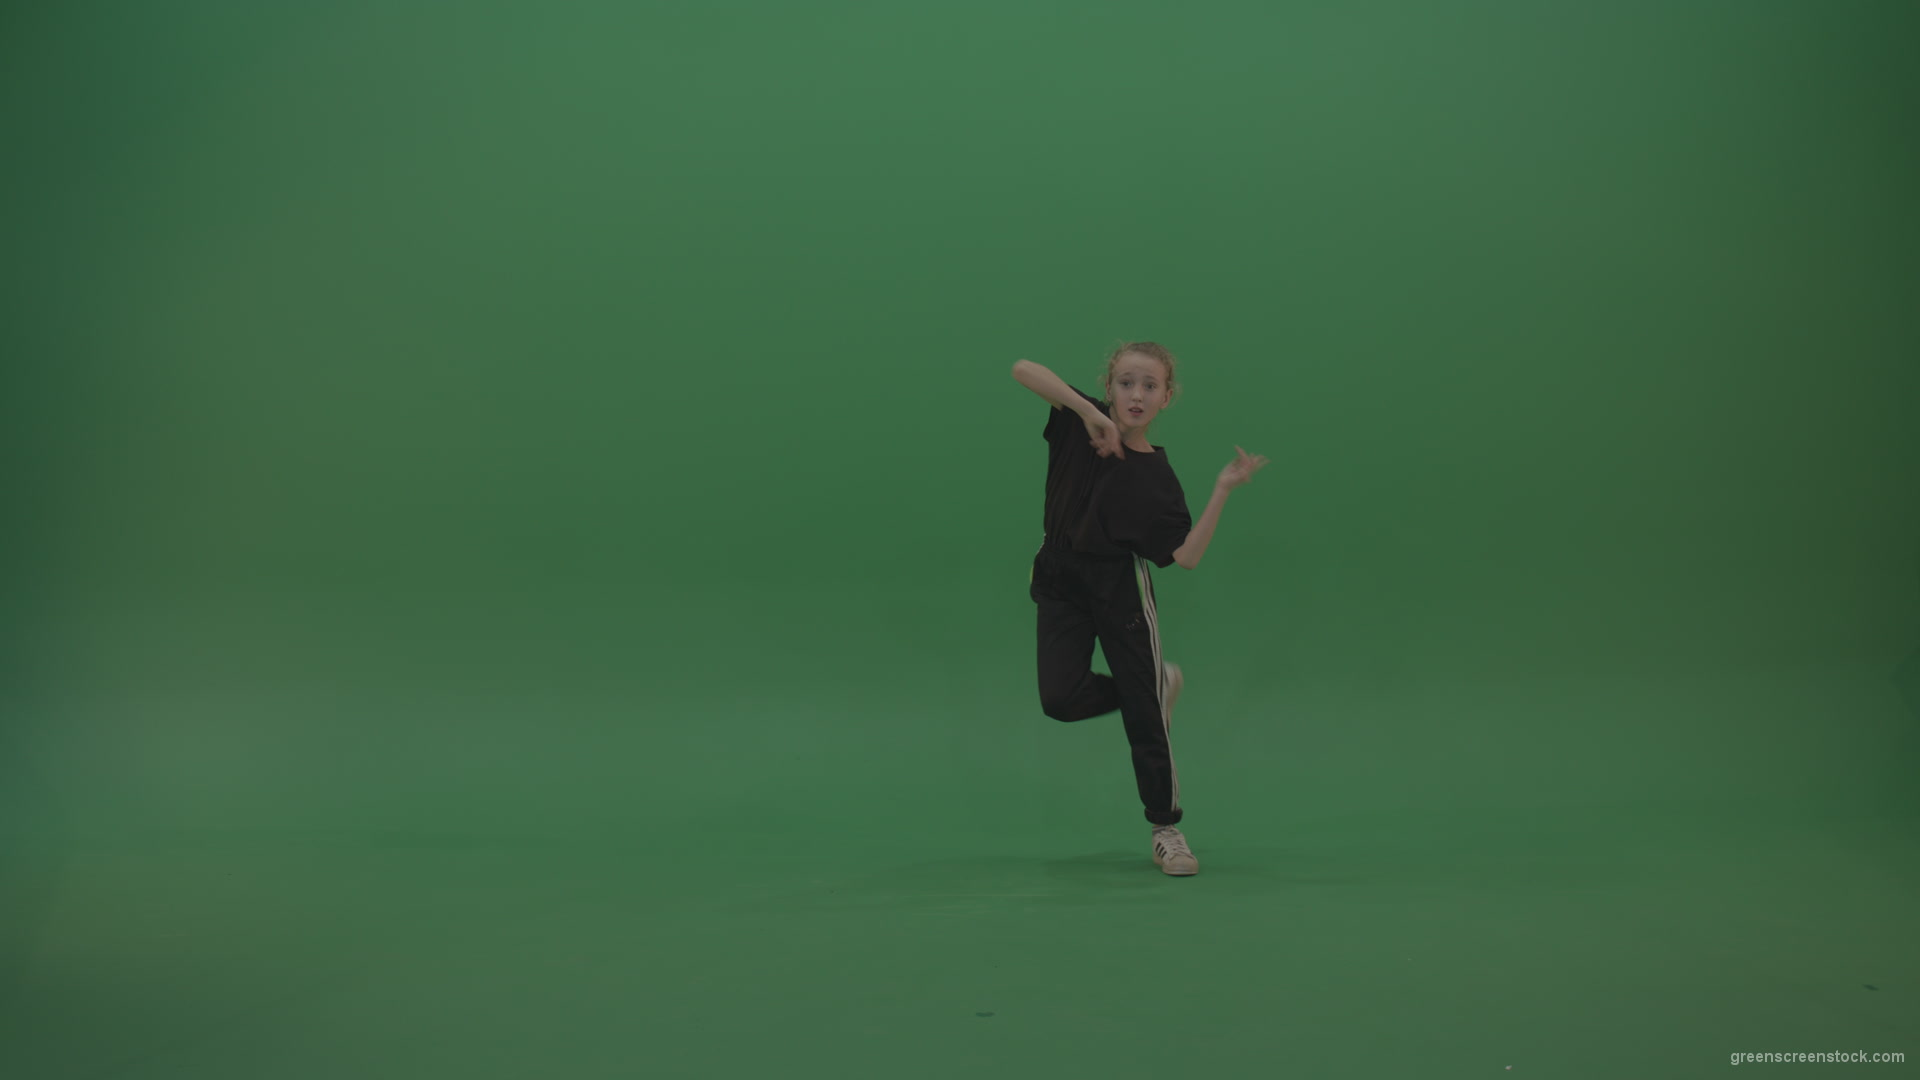 Incredible_Dance_Hip_Hop_Moves_From_Young_SmalKid_Female_Wearing_Black_Sweat_Suite_And_White_Trainers_On_Green_Screen_Wall_Background_005 Green Screen Stock